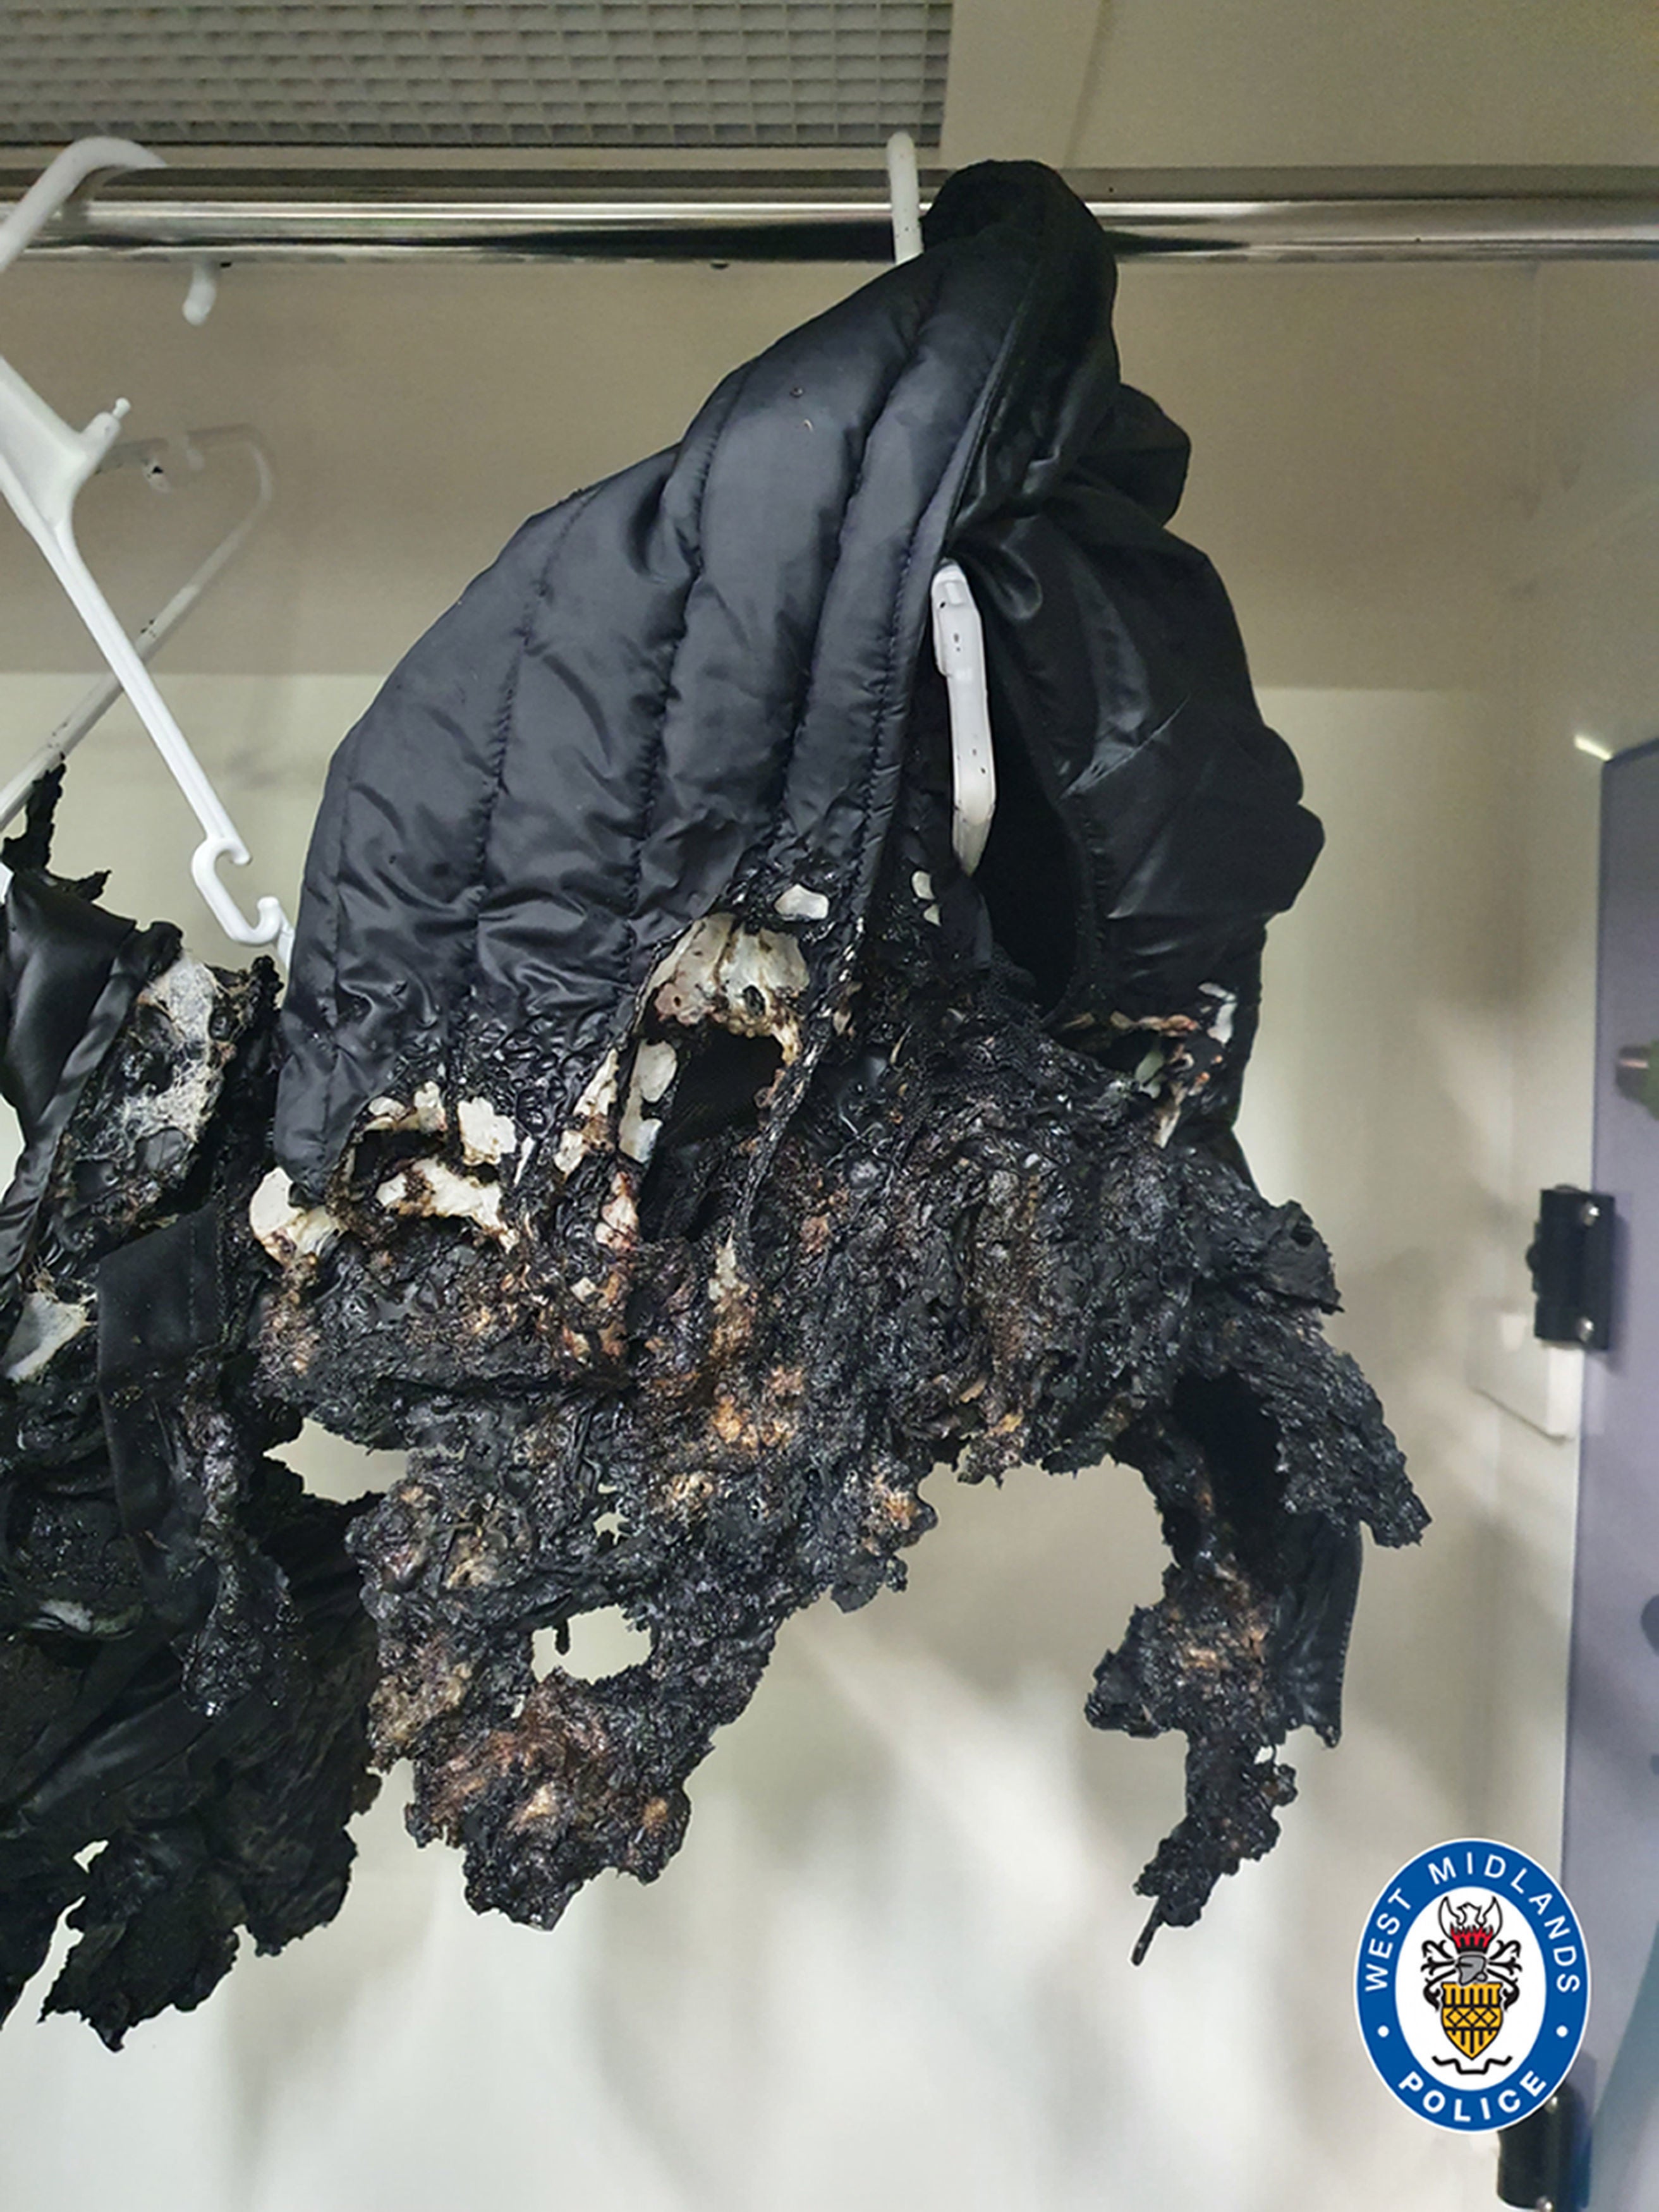 The burnt clothing of Mohammed Rayaz after the attack by Mohammed Abbkr